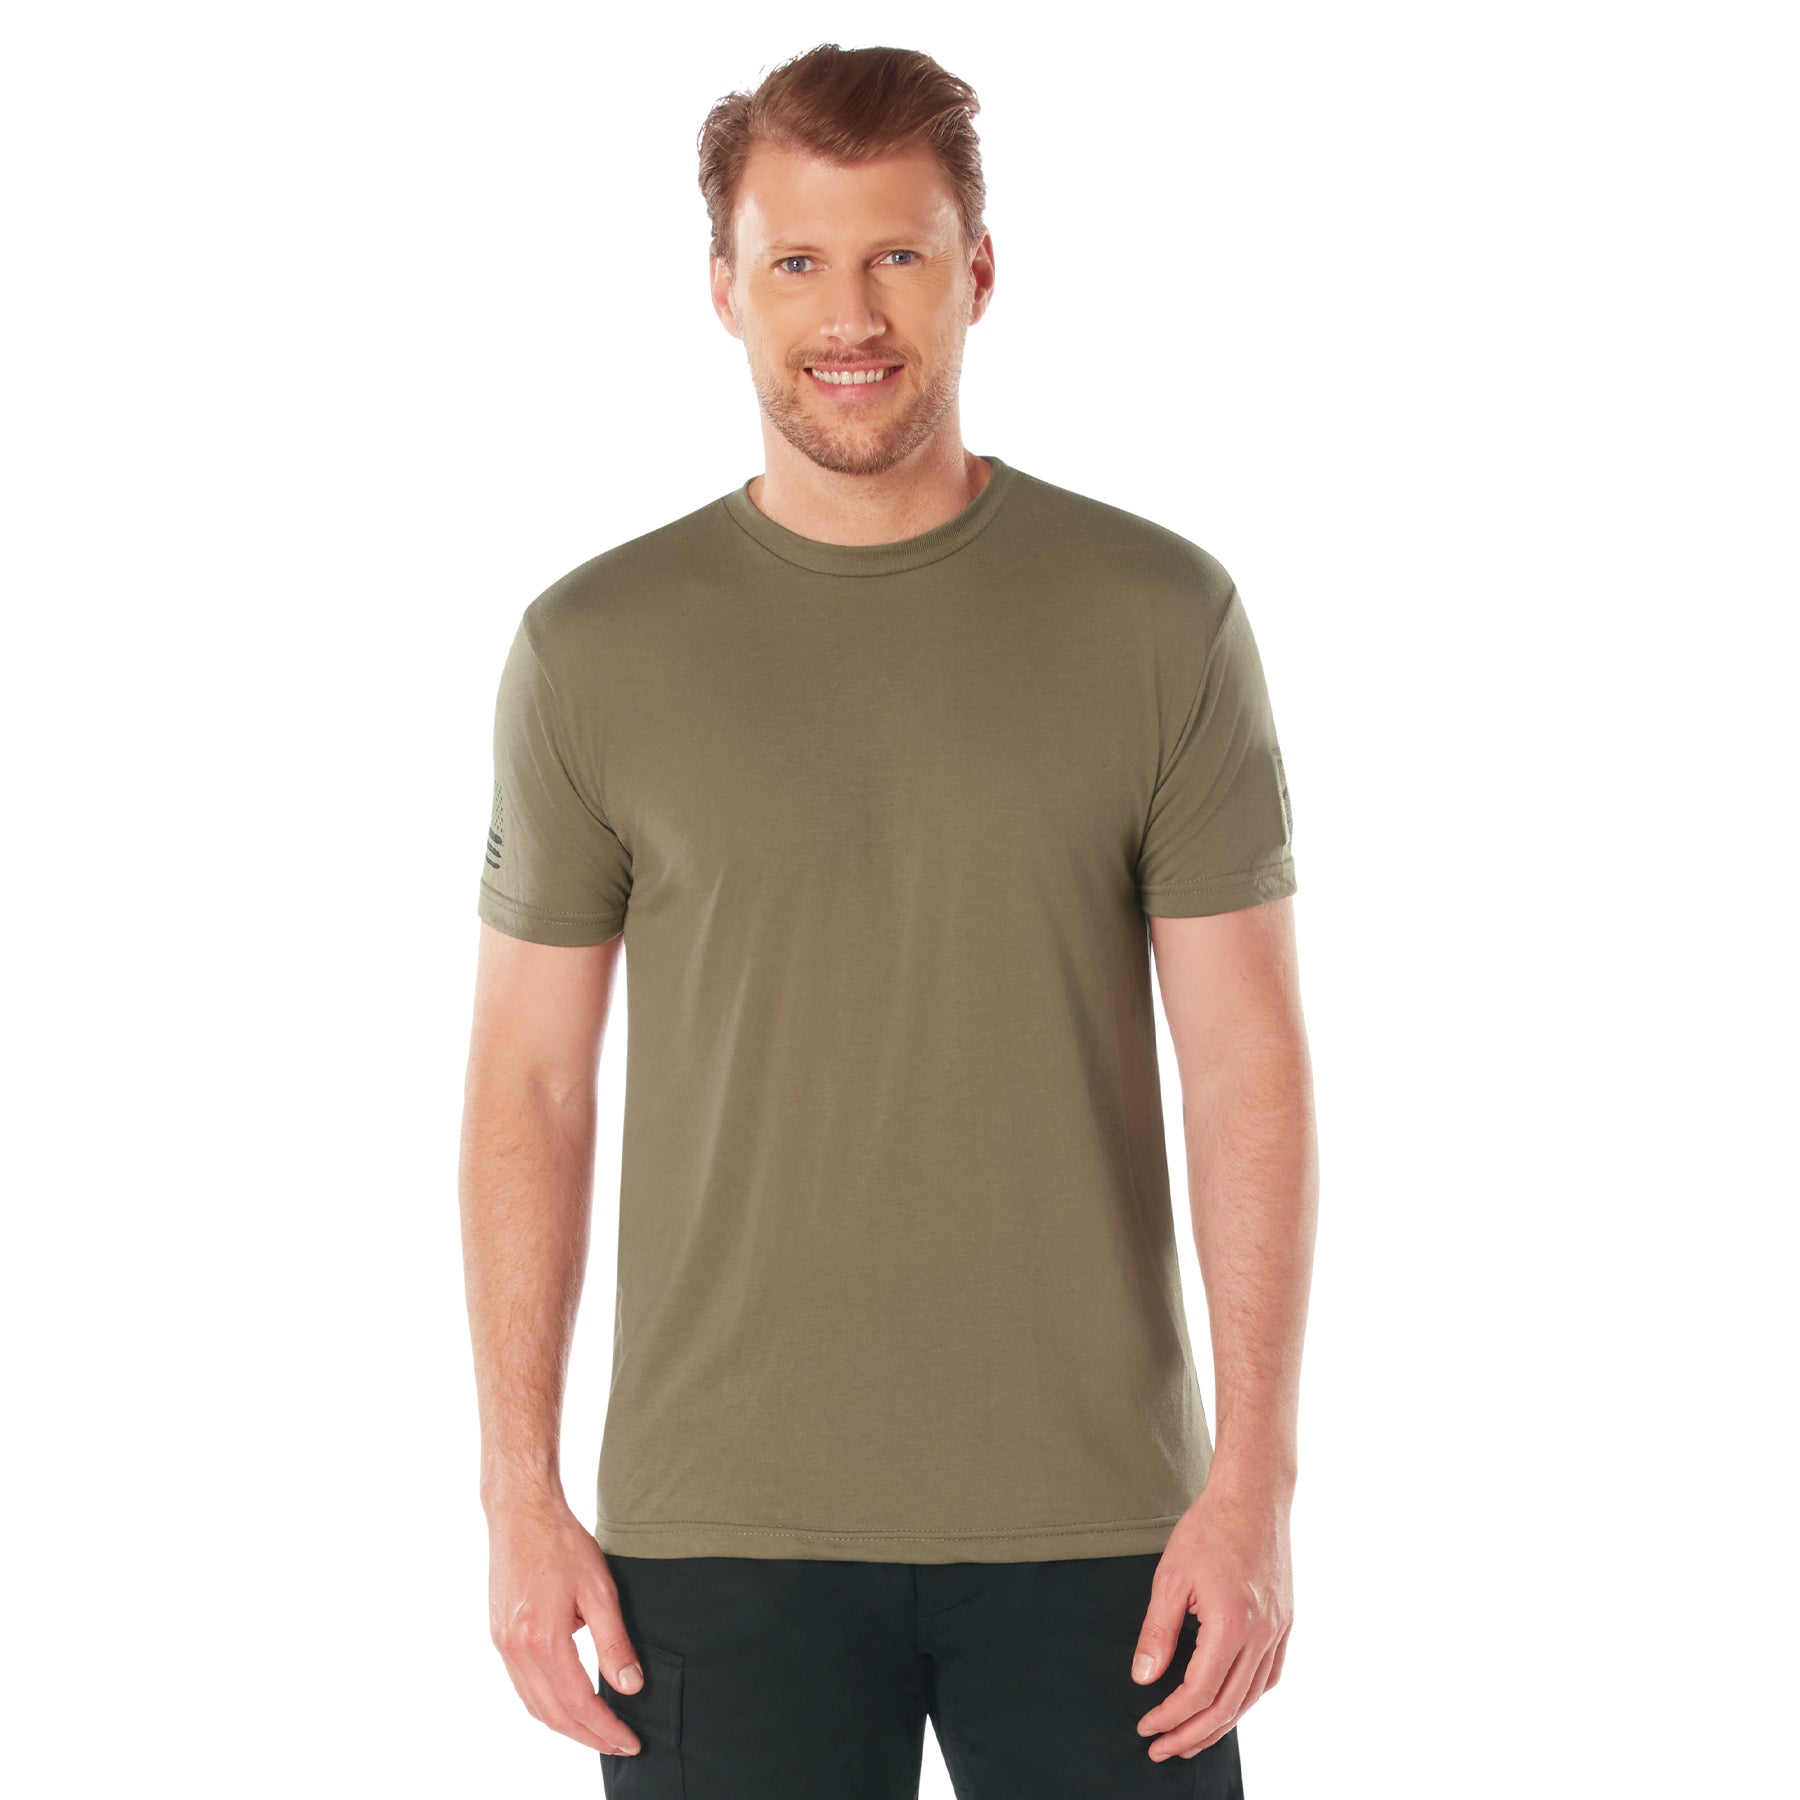 [AR 670-1] Poly Moisture Wicking Athletic Fit T-Shirts Coyote Brown AR 670-1